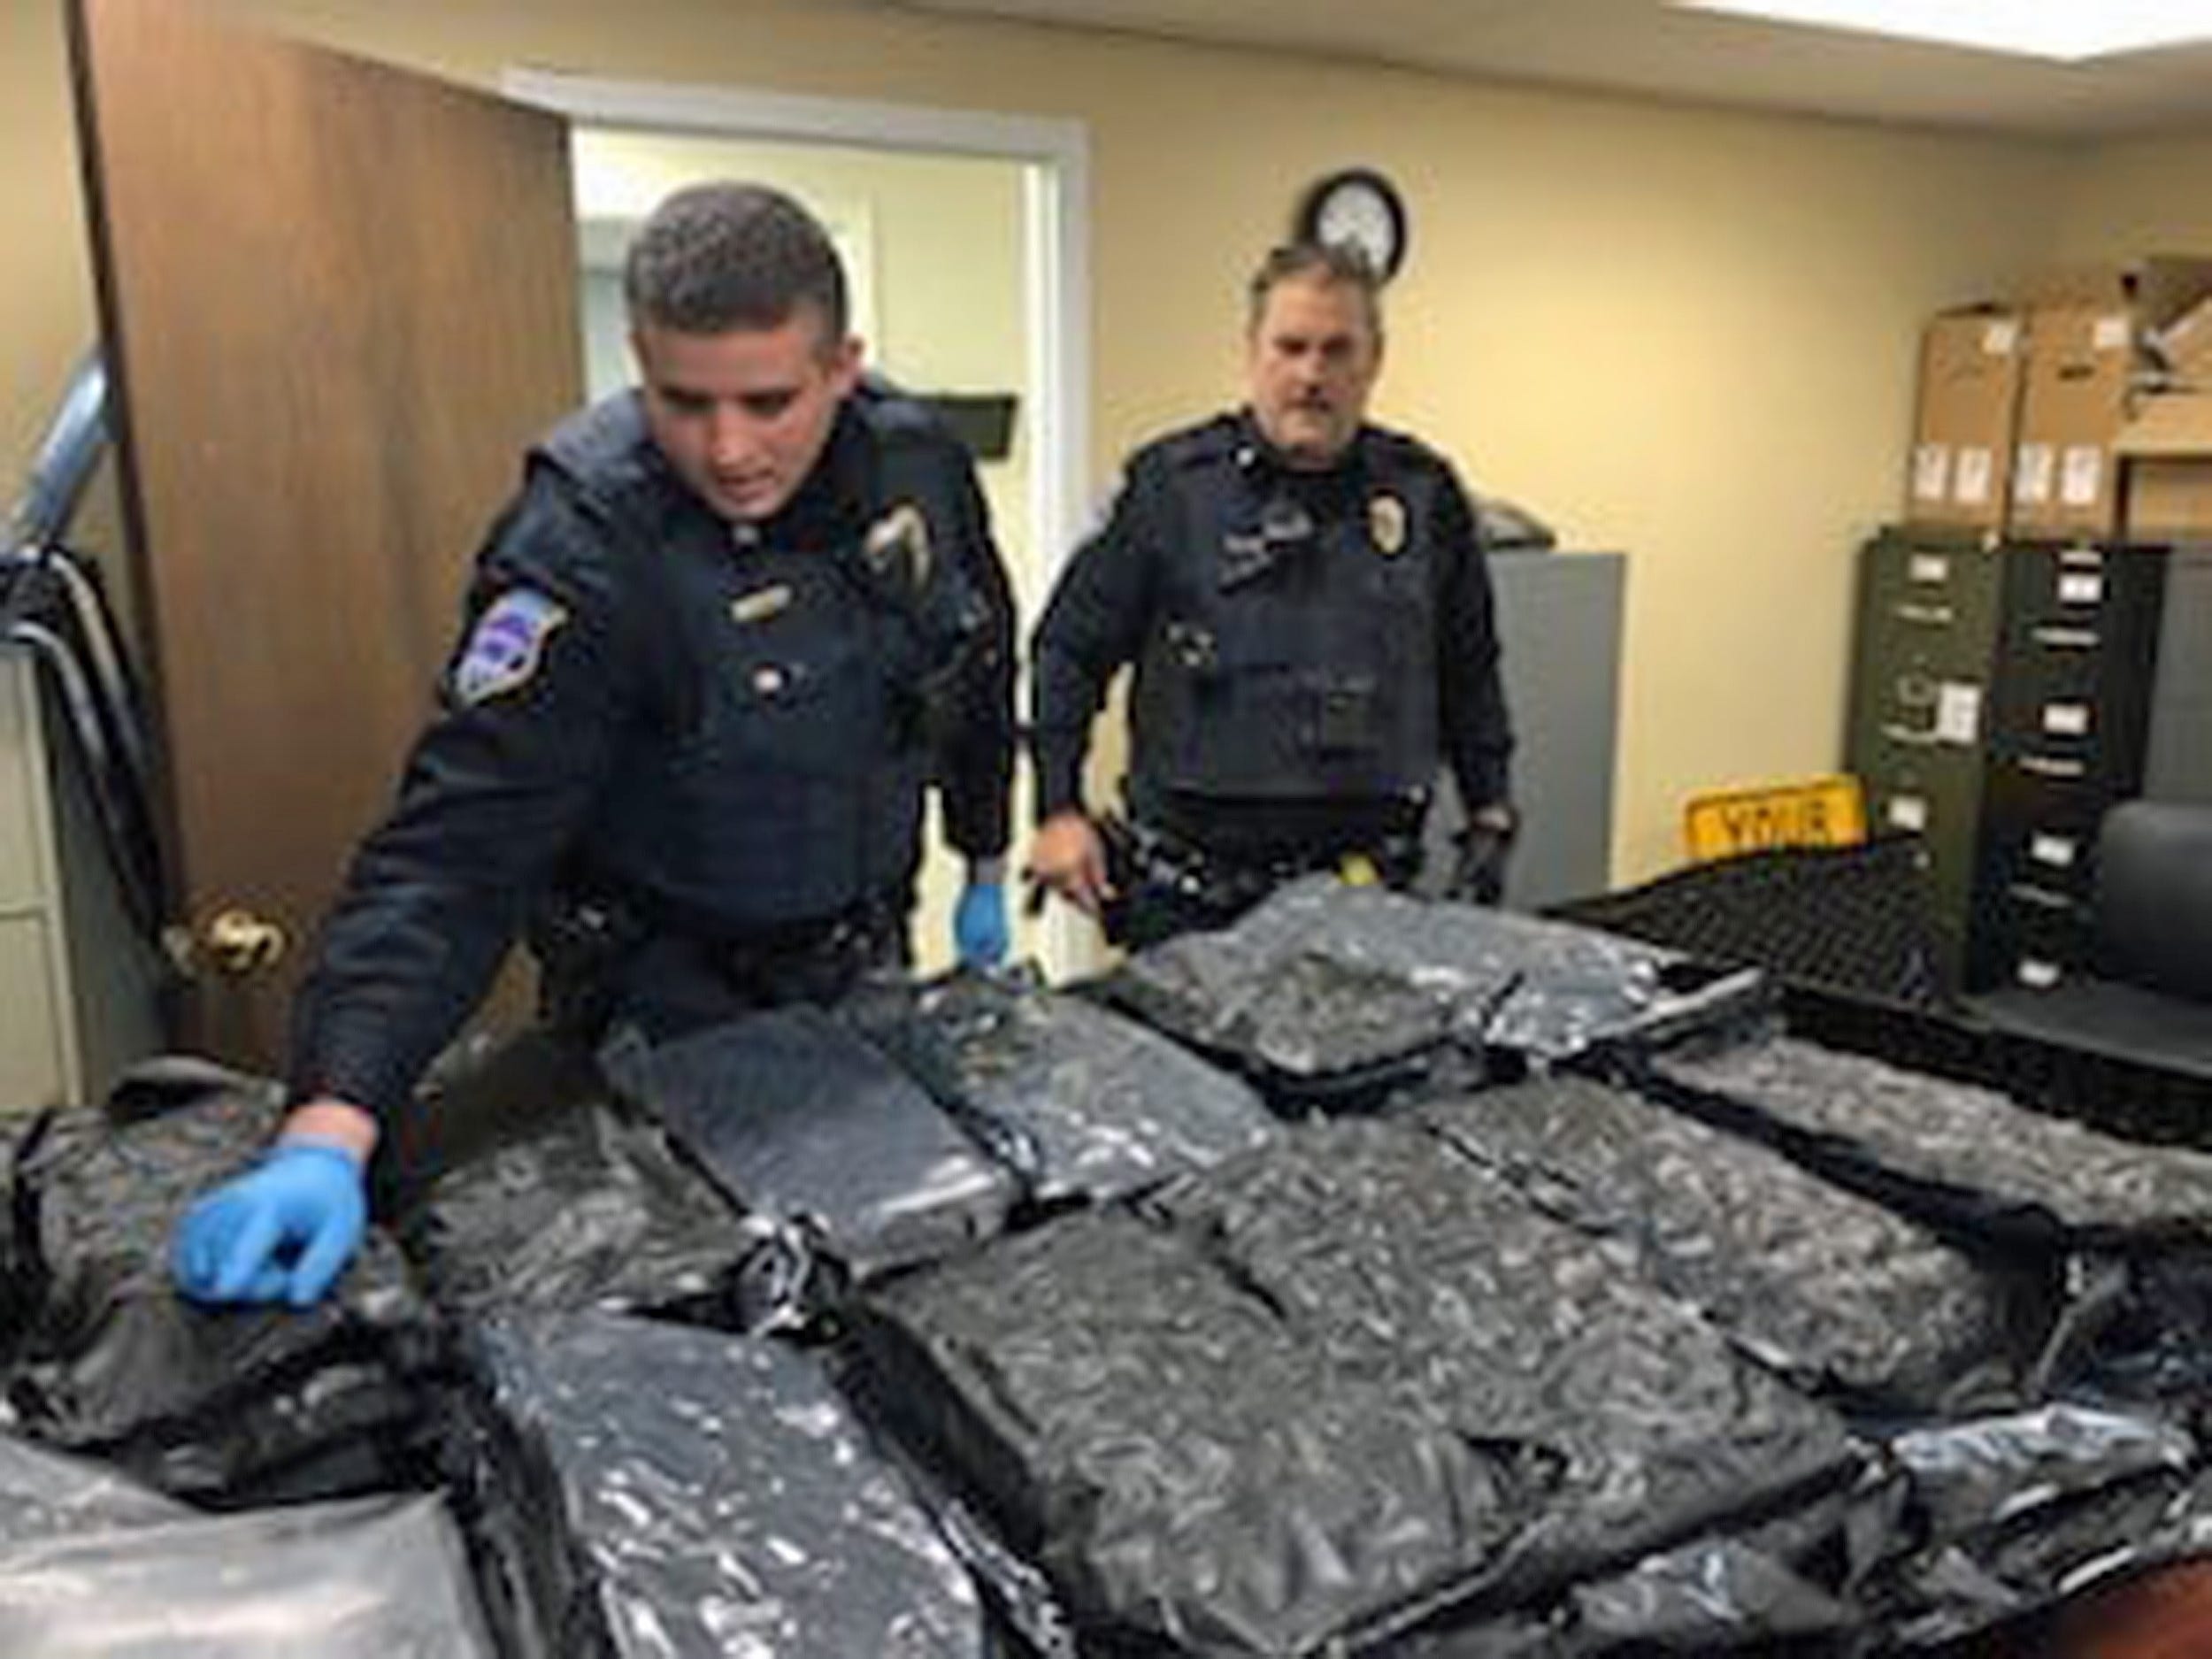 Police in Pennsylvania found 315,000 worth of marijuana in a drug bust